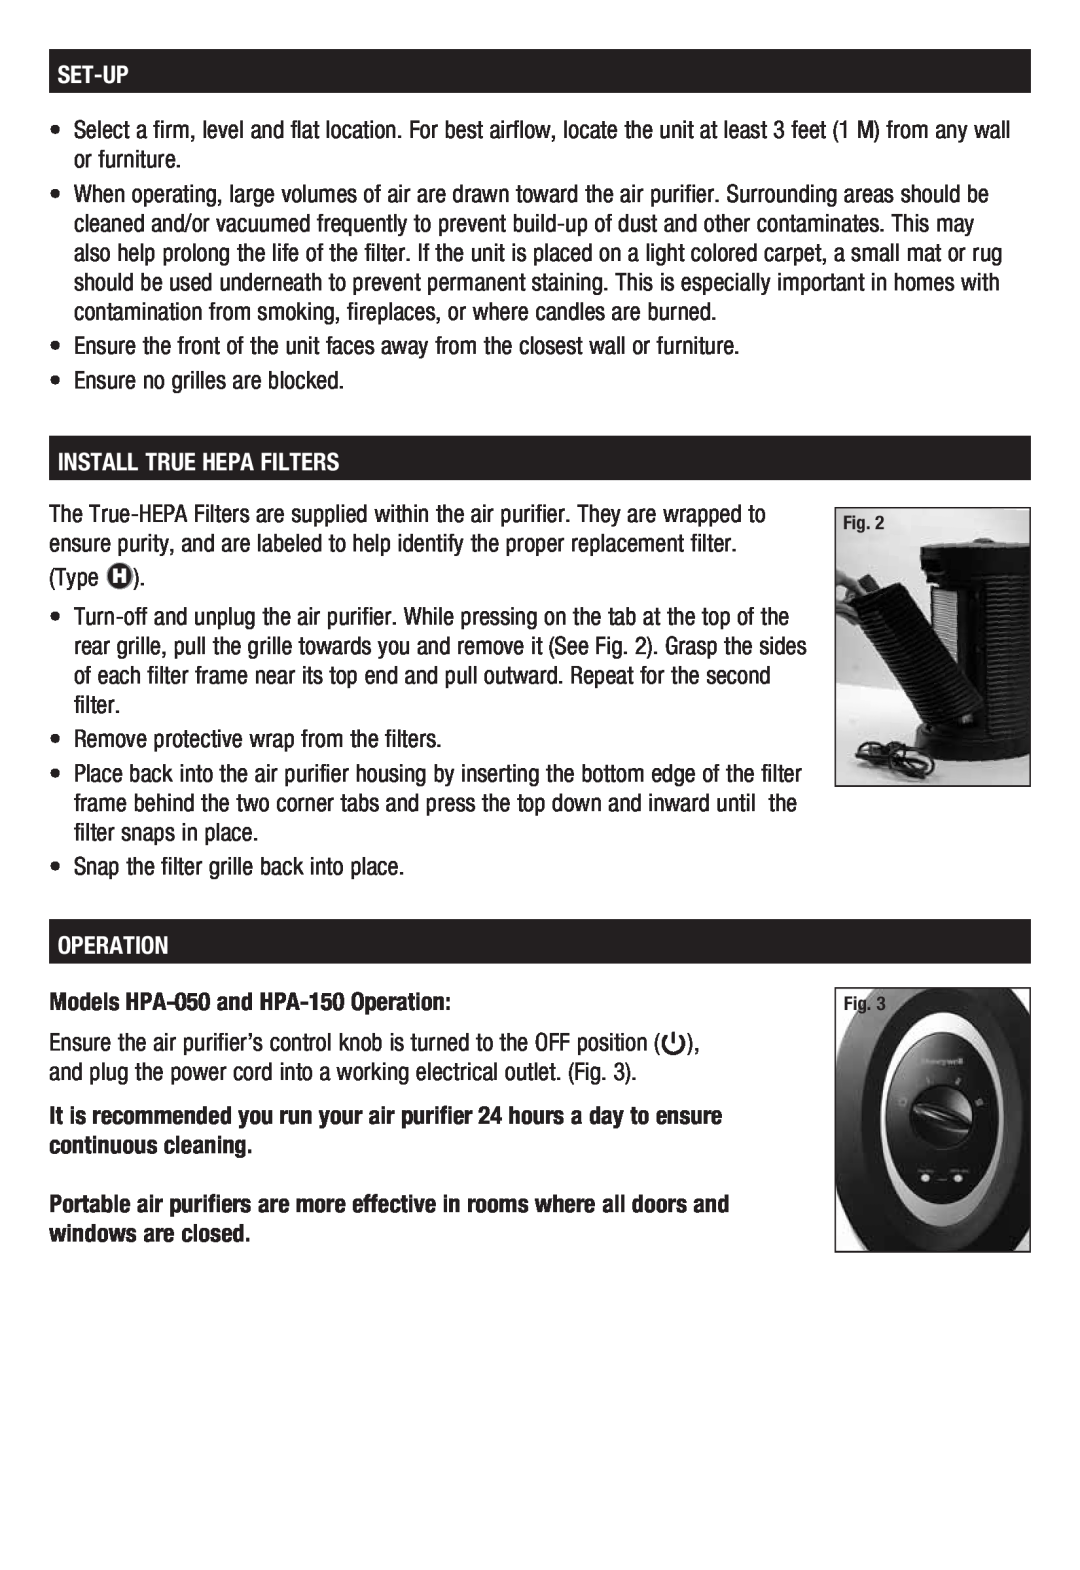 Honeywell HPA050 important safety instructions Set-Up, Install True Hepa Filters, Operation 